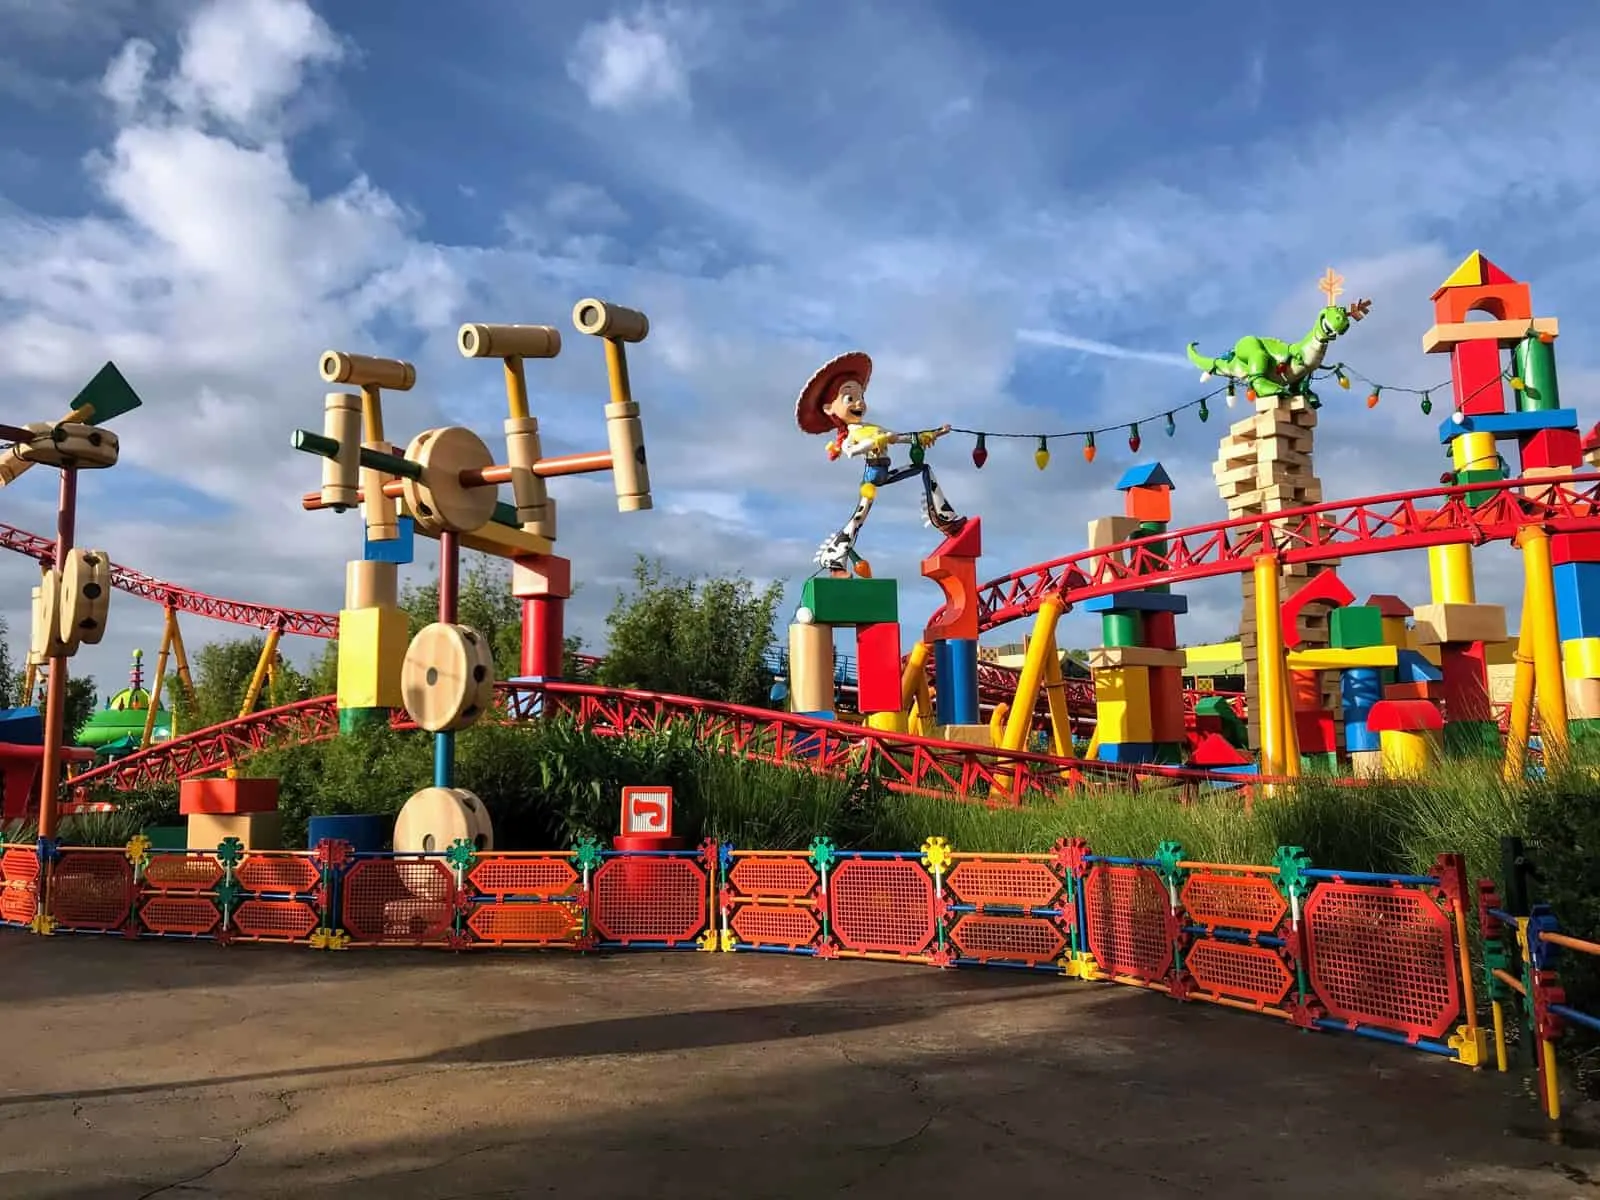 Our best tips to avoid the lines in Toy Story Land